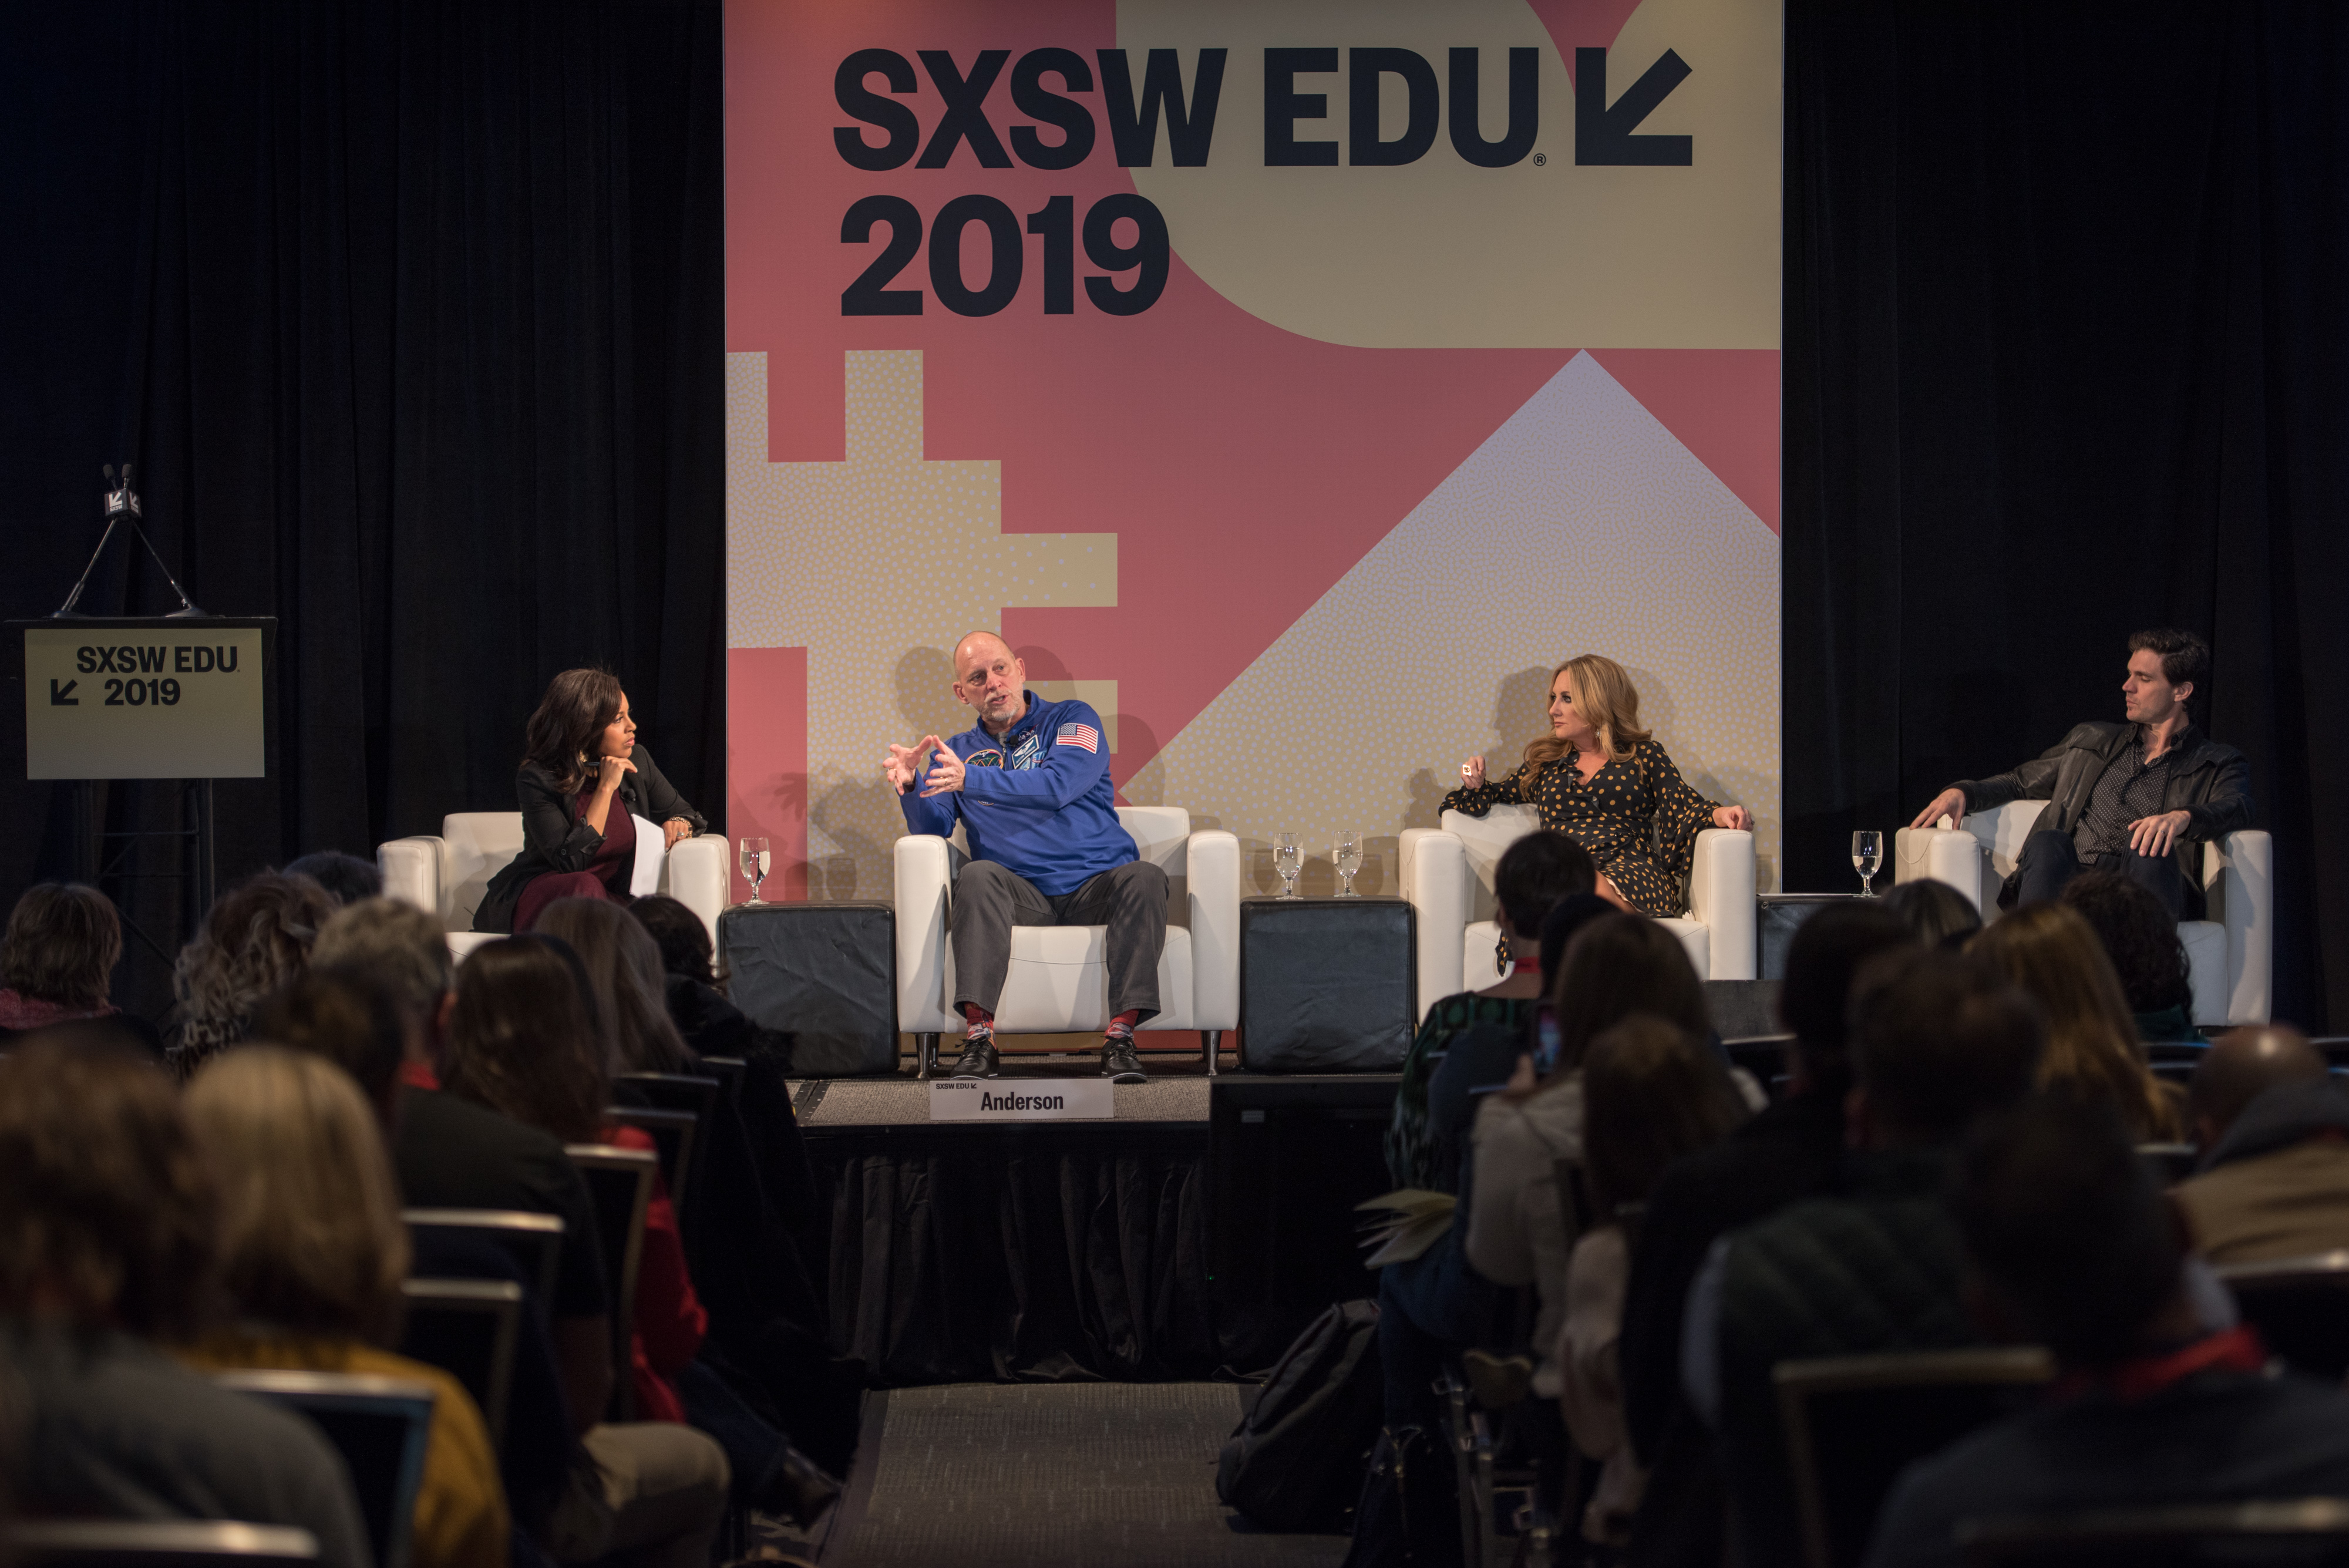 SXSW EDU 2019 - Why Music Matters: Shaping the Next Generation. Photo by Tico Mendoza.